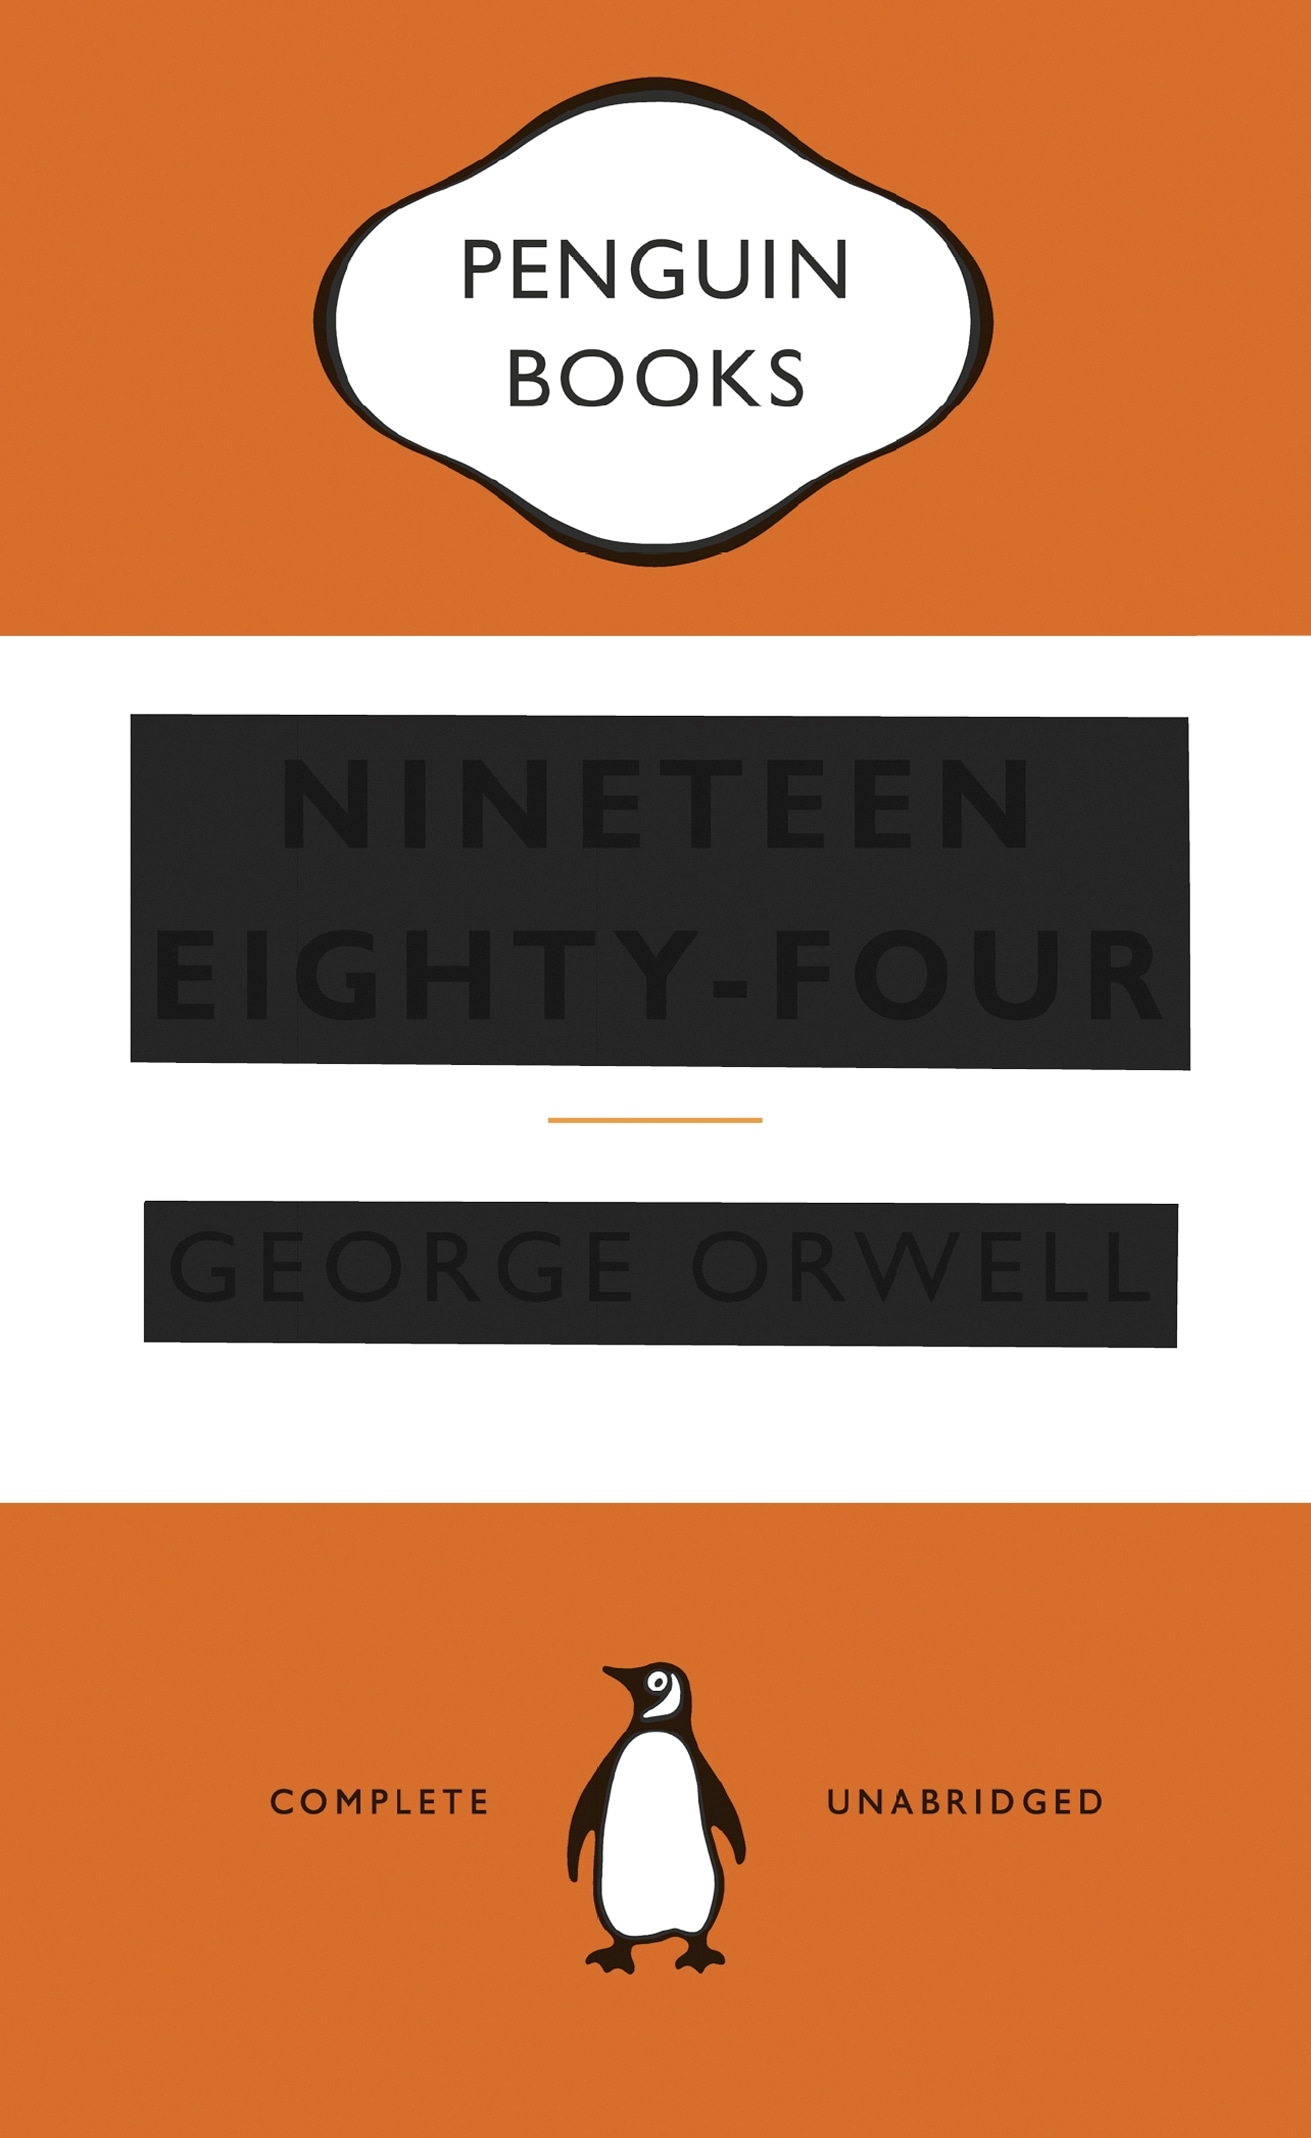 Book “Nineteen Eighty-Four” by George Orwell — January 3, 2013